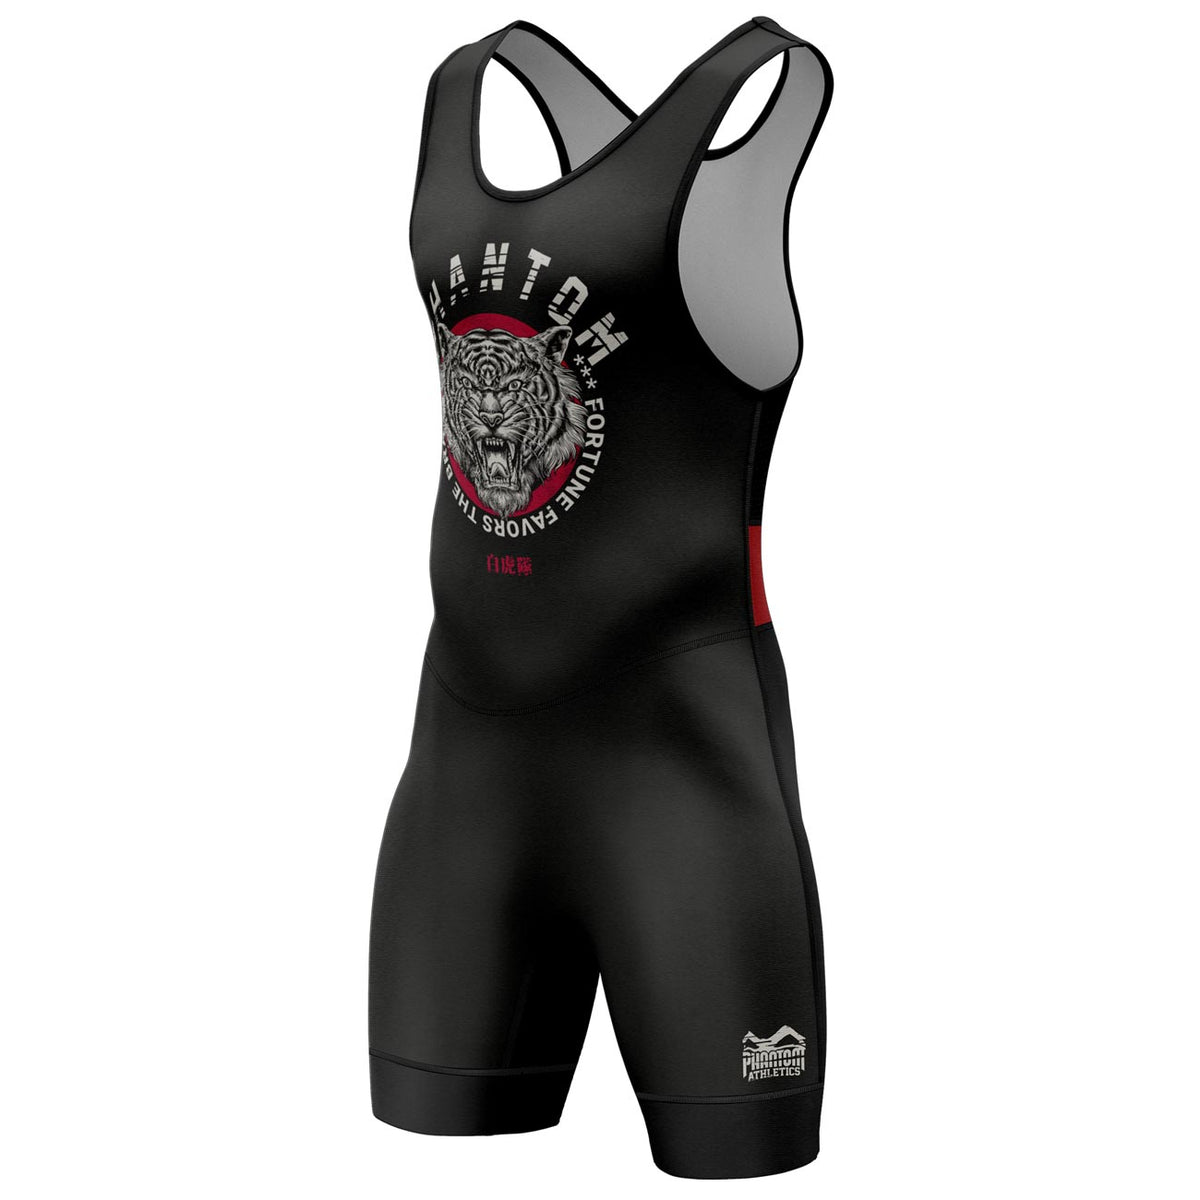 Phantom wrestling jersey TIGER UNIT in black with tiger design. Ideal for your wrestling training. In excellent fit and durability for training and competition.